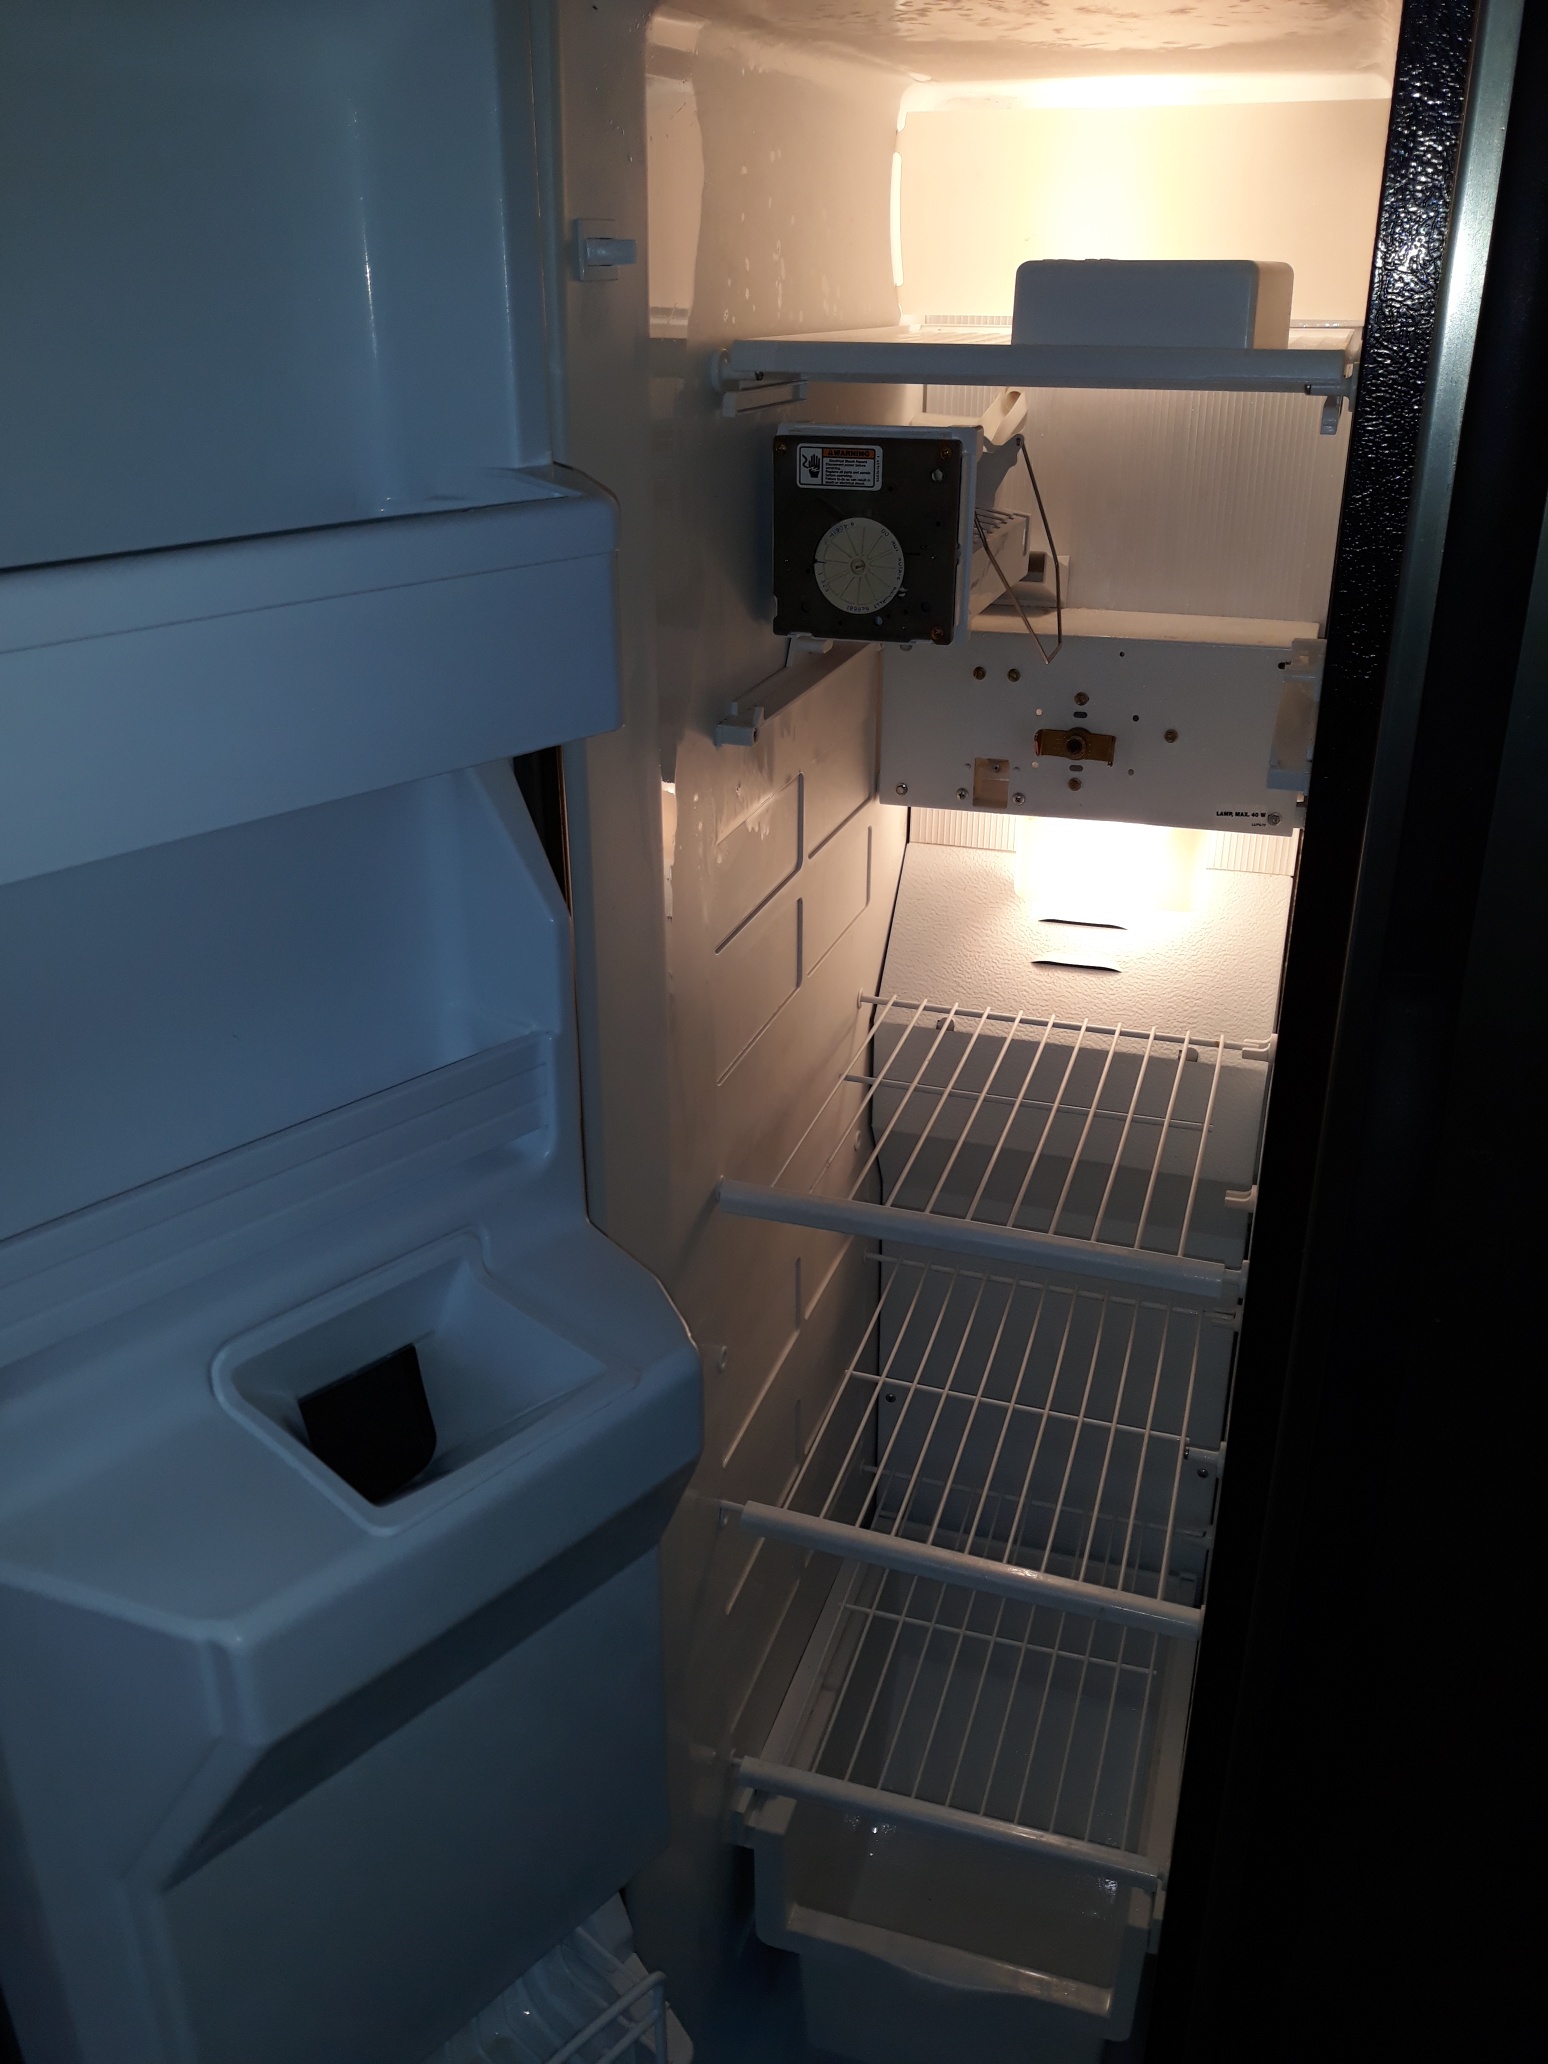 appliance repair refrigerator repair repaired by replacement of the broken ice maker assembly davenport dr the villages fl 32162